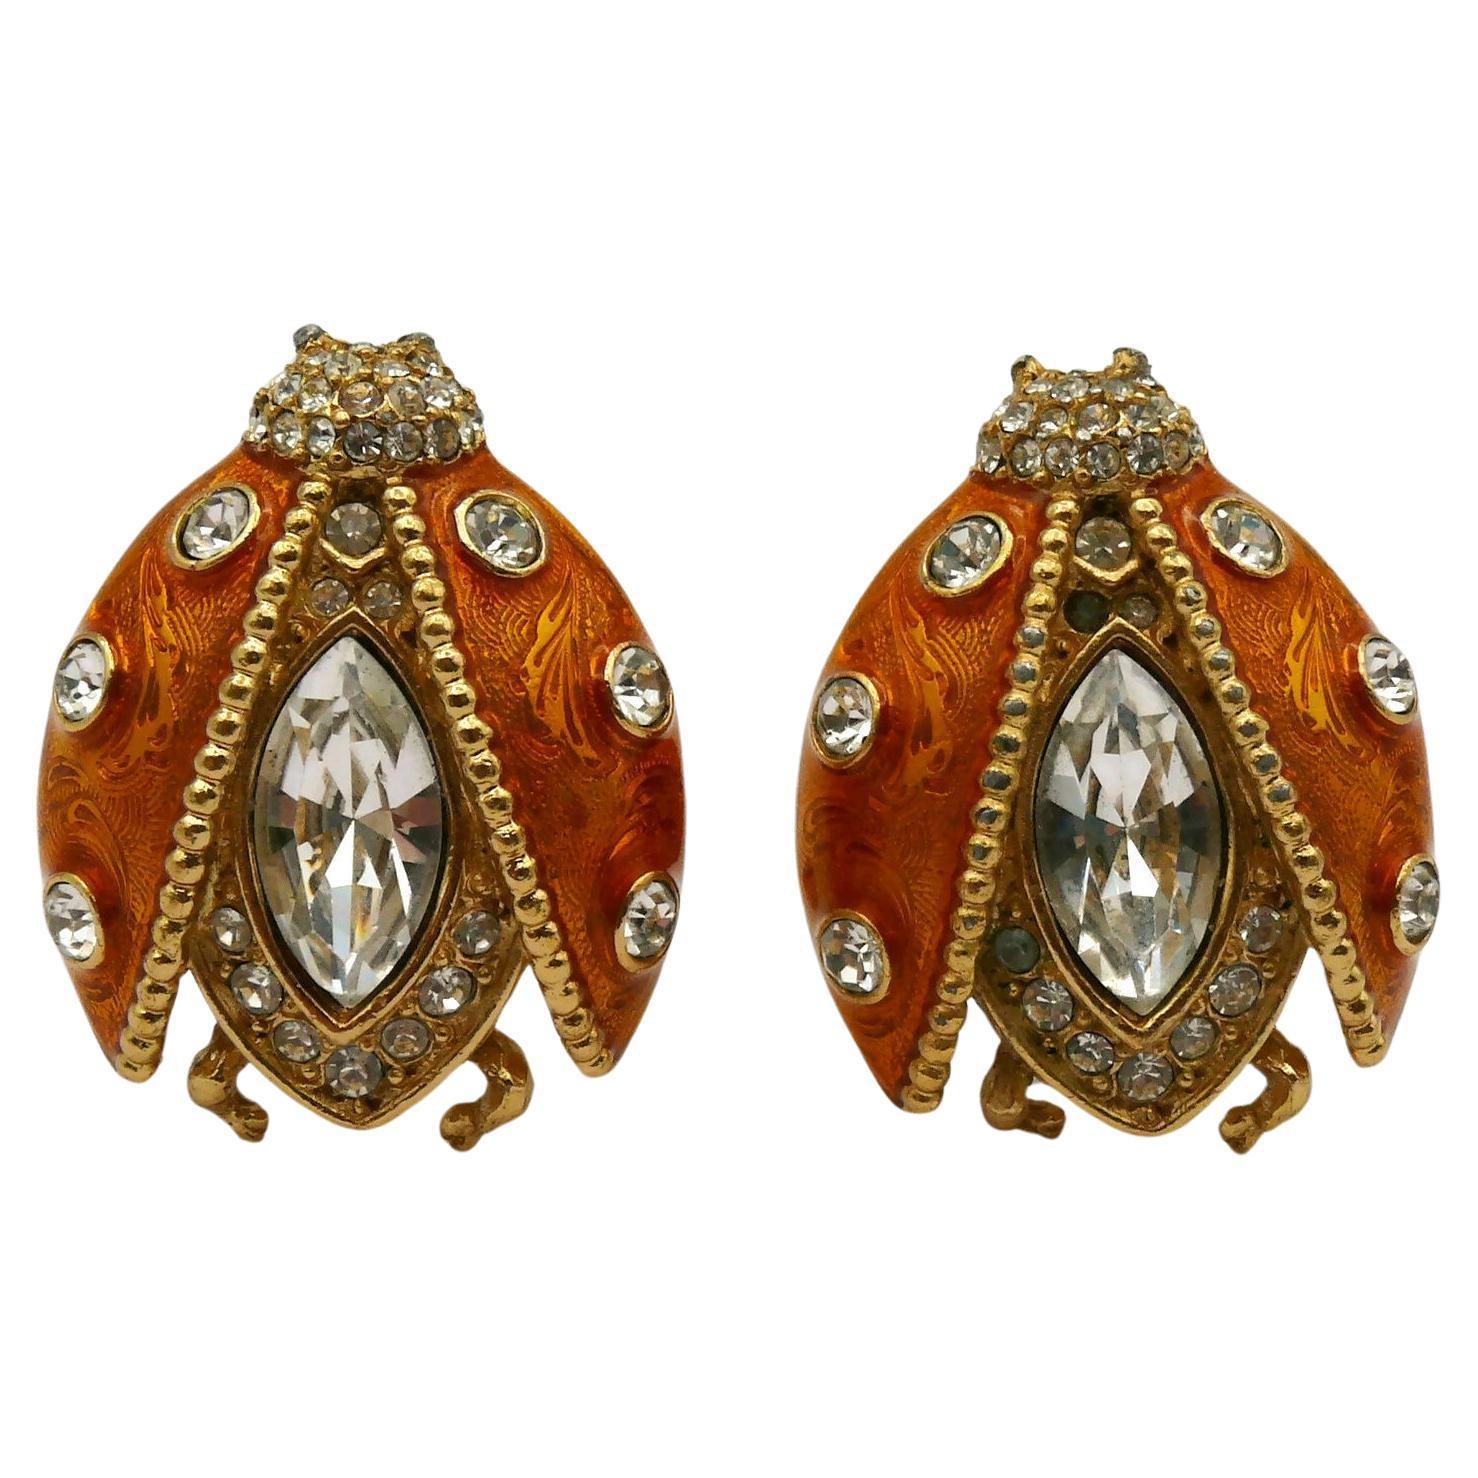 CHRISTIAN DIOR Boutique Iconic Jewelled Ladybug Clip-On Earrings For Sale